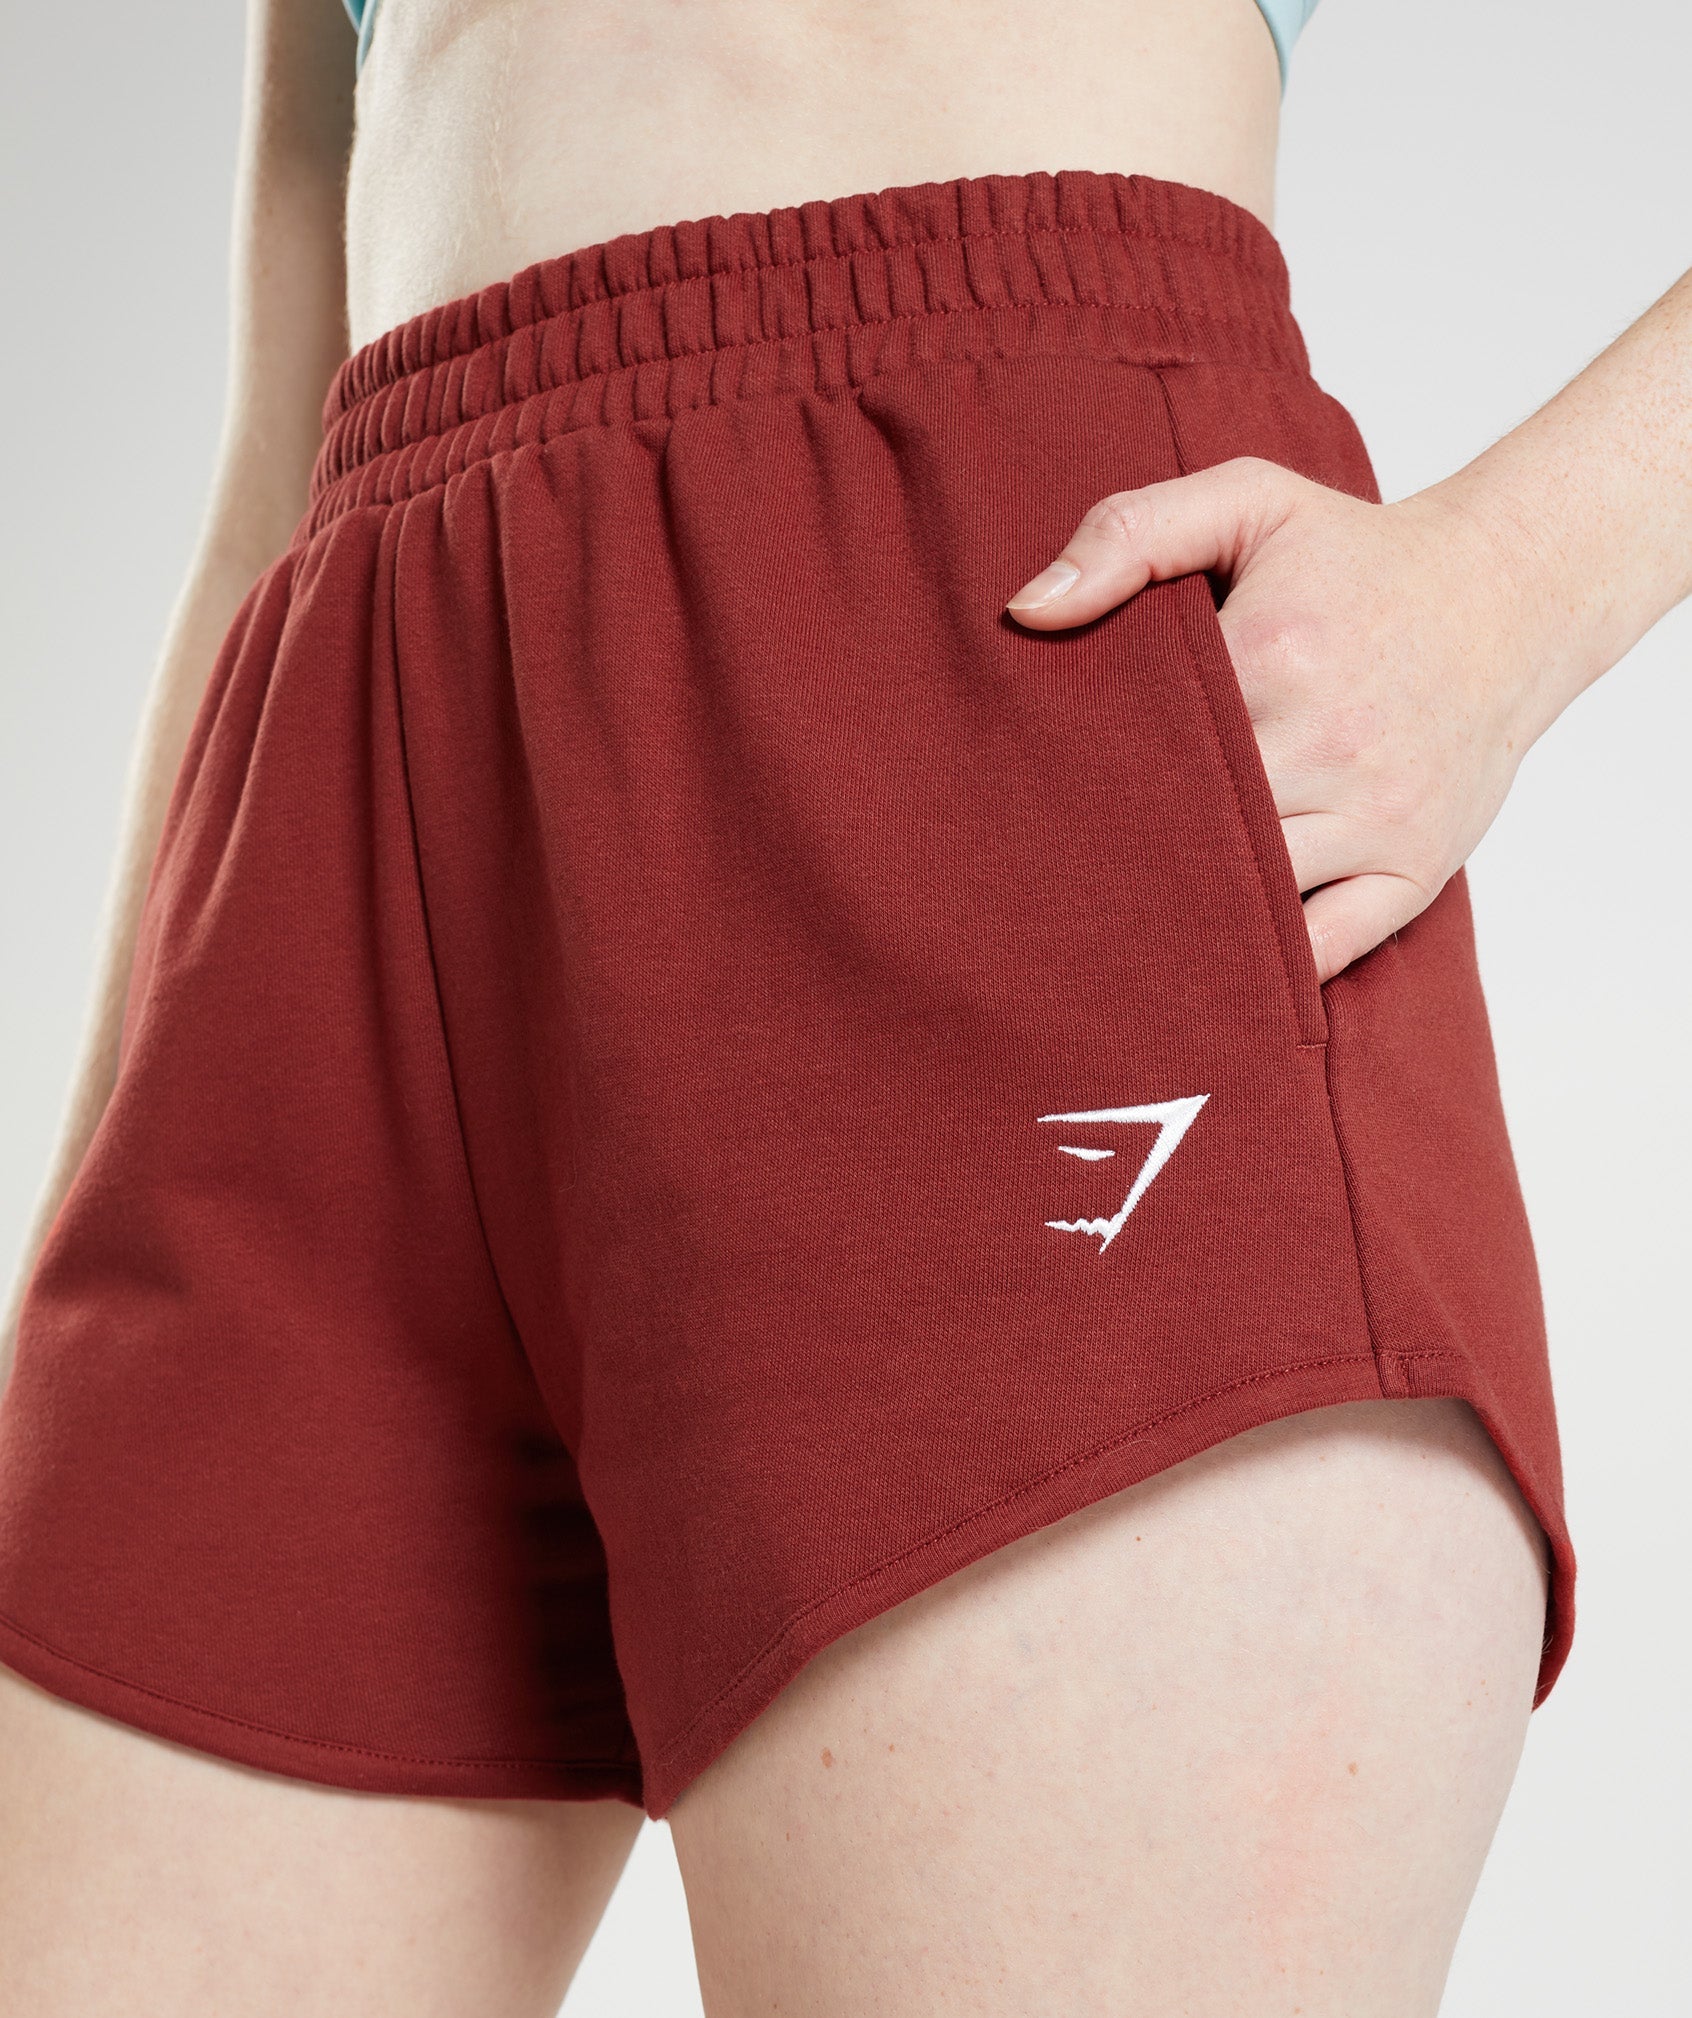 Training Sweat Shorts in Rosewood Red